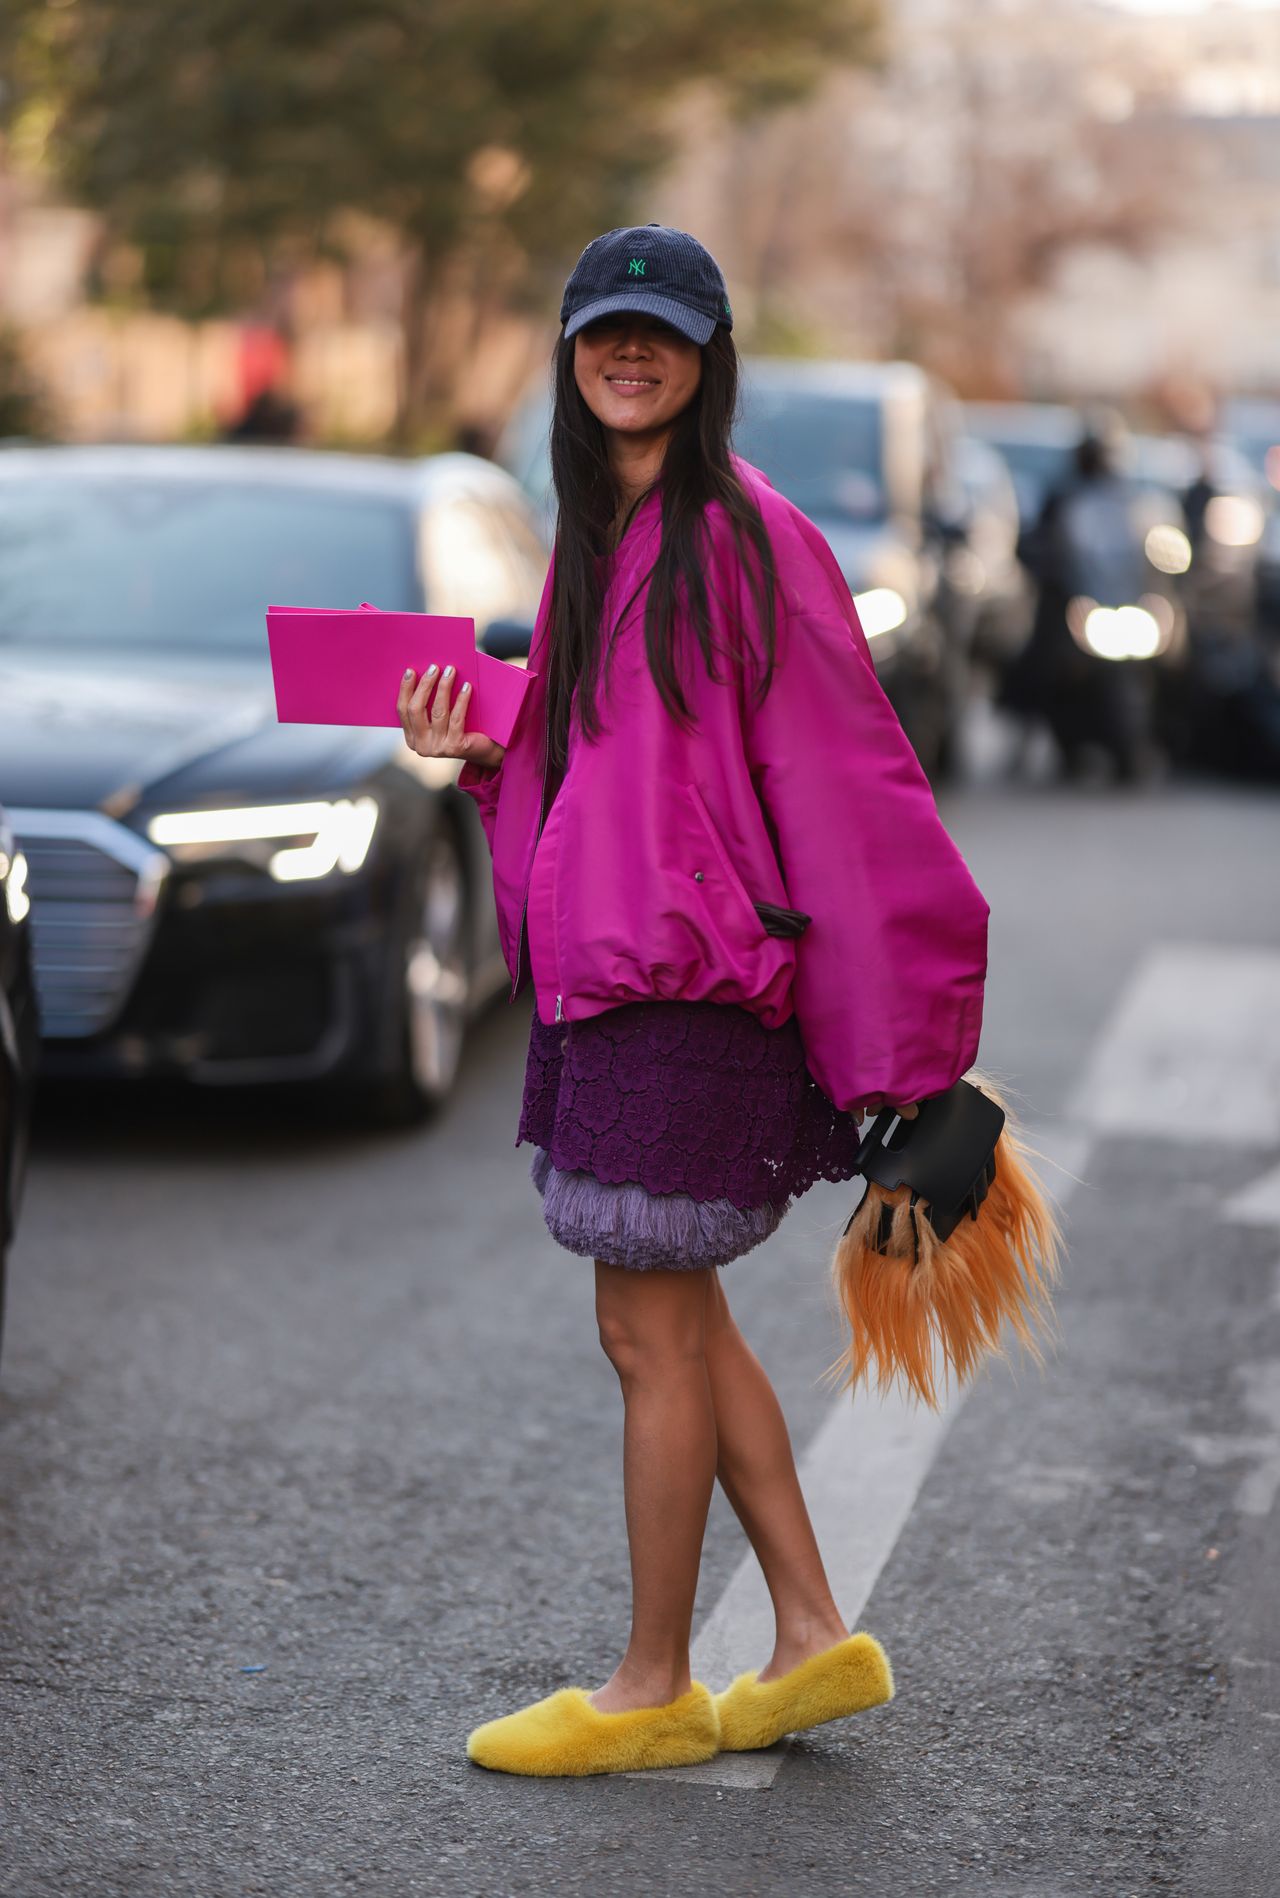 Fur ballerinas - a new trend is taking over the fashion world